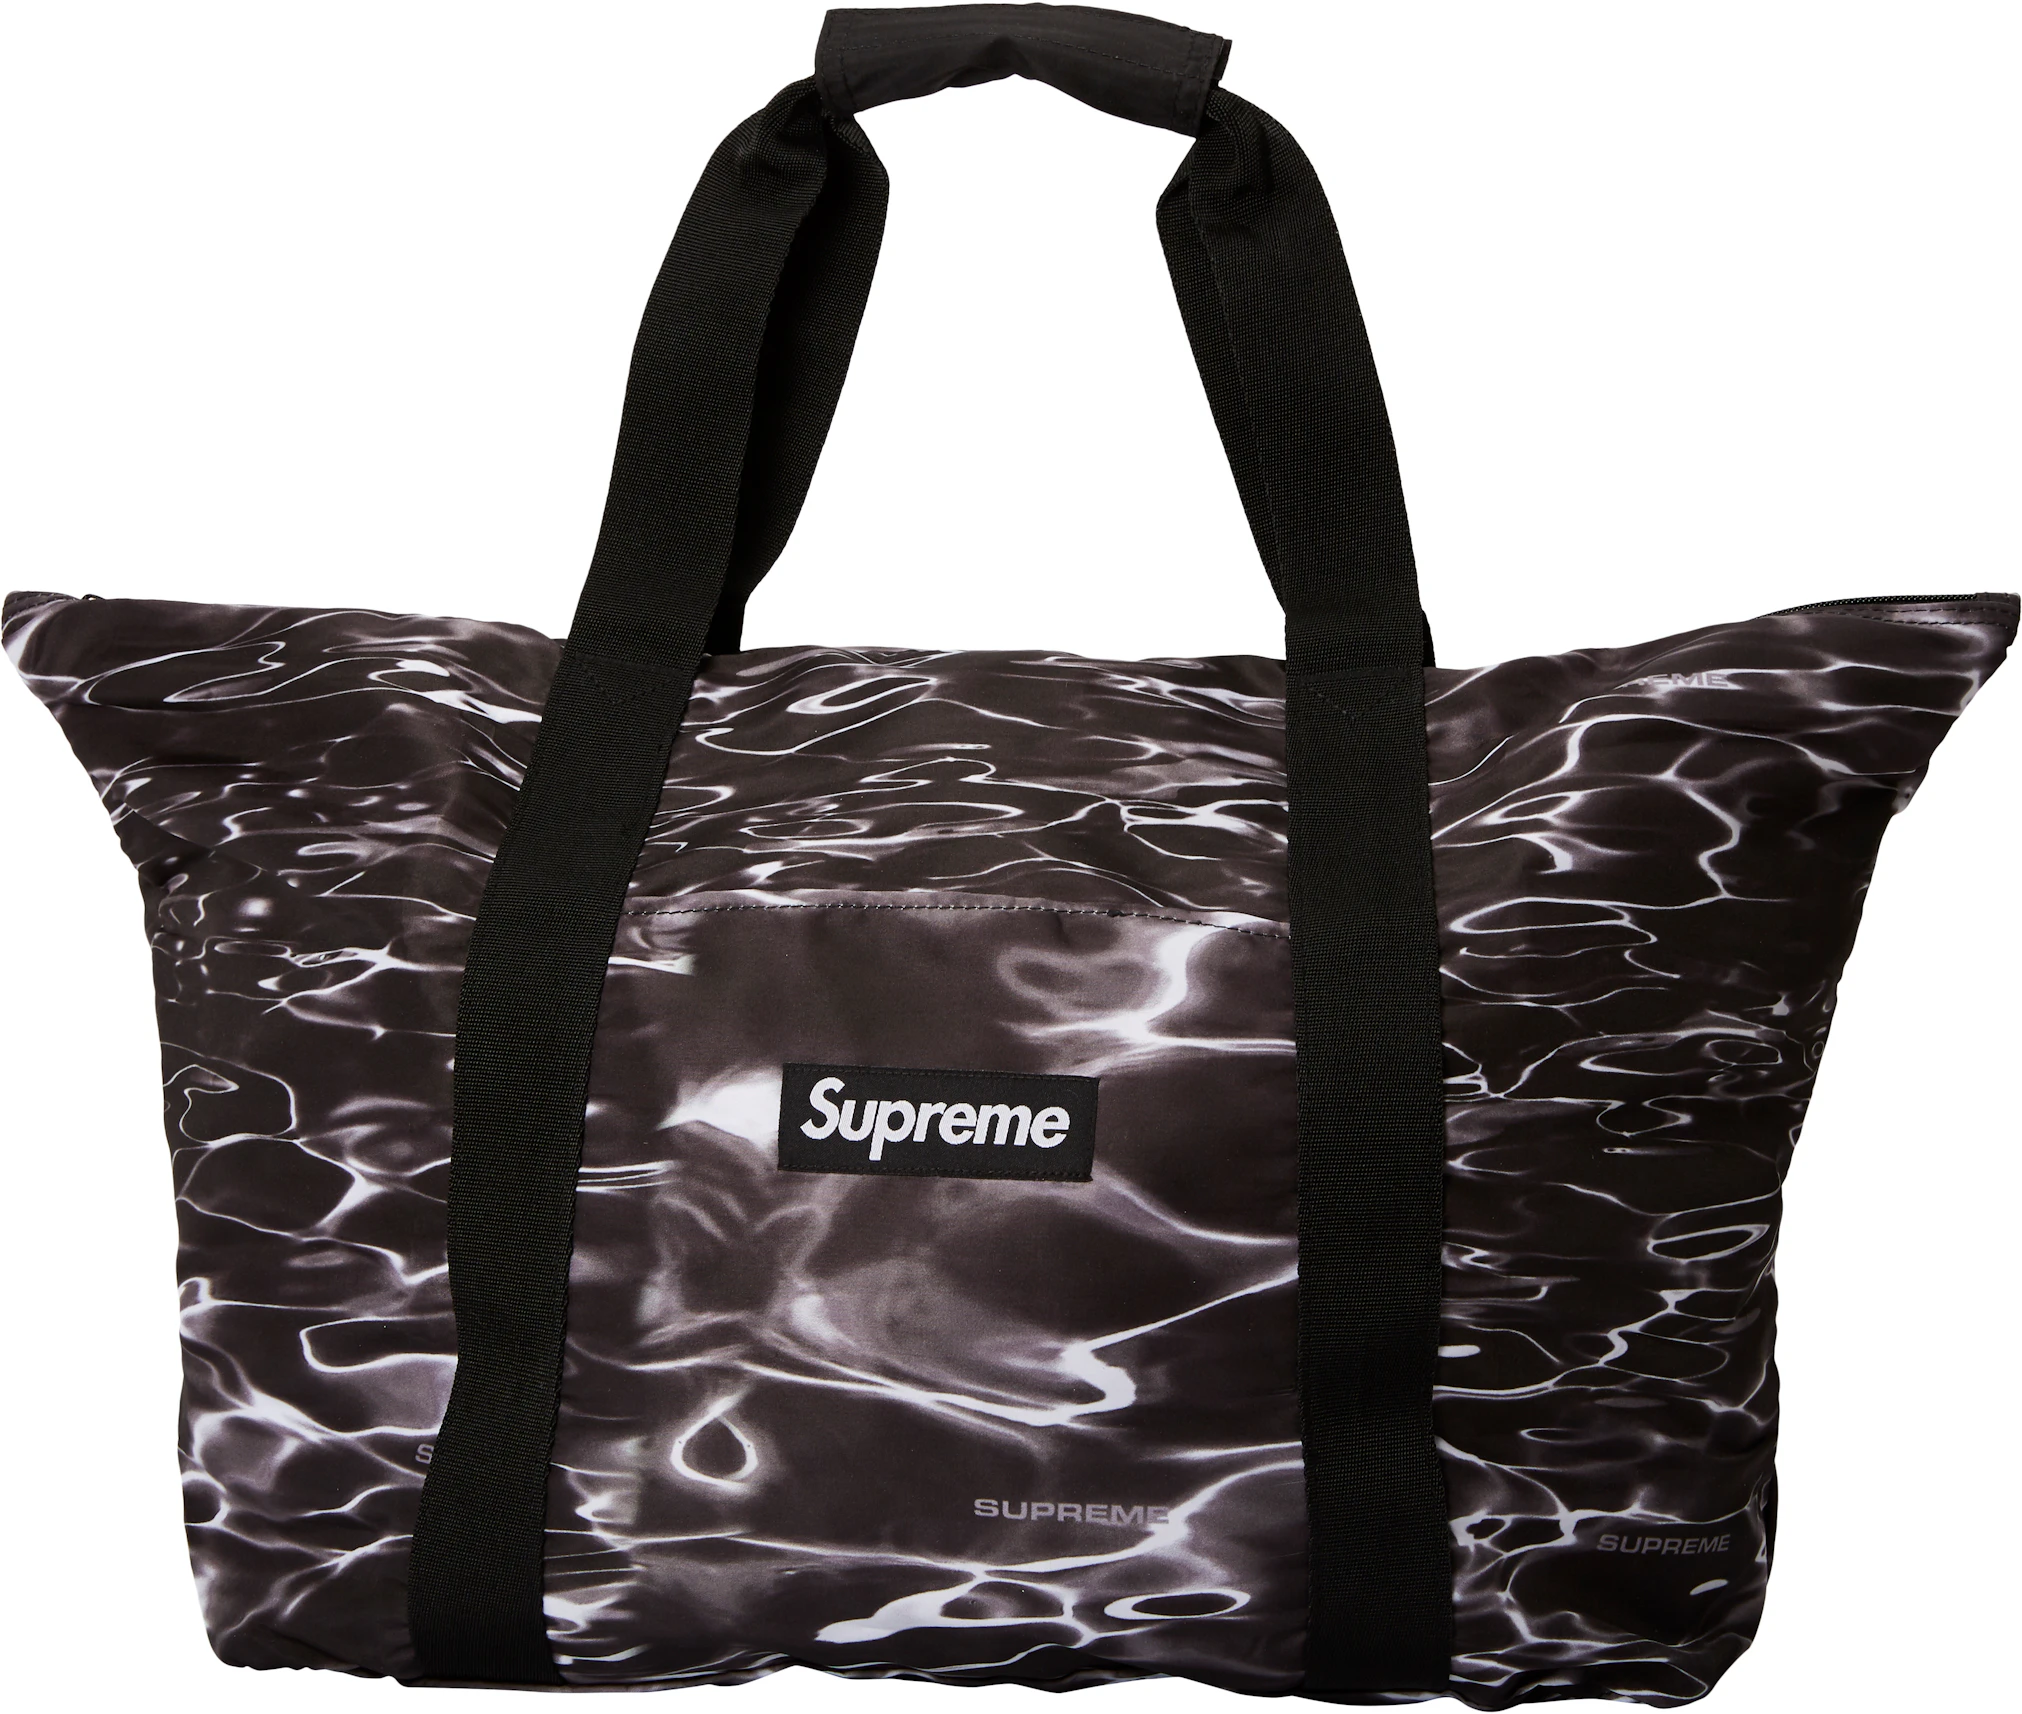 Supreme Ripple Packable Tote Black - SS17 - US